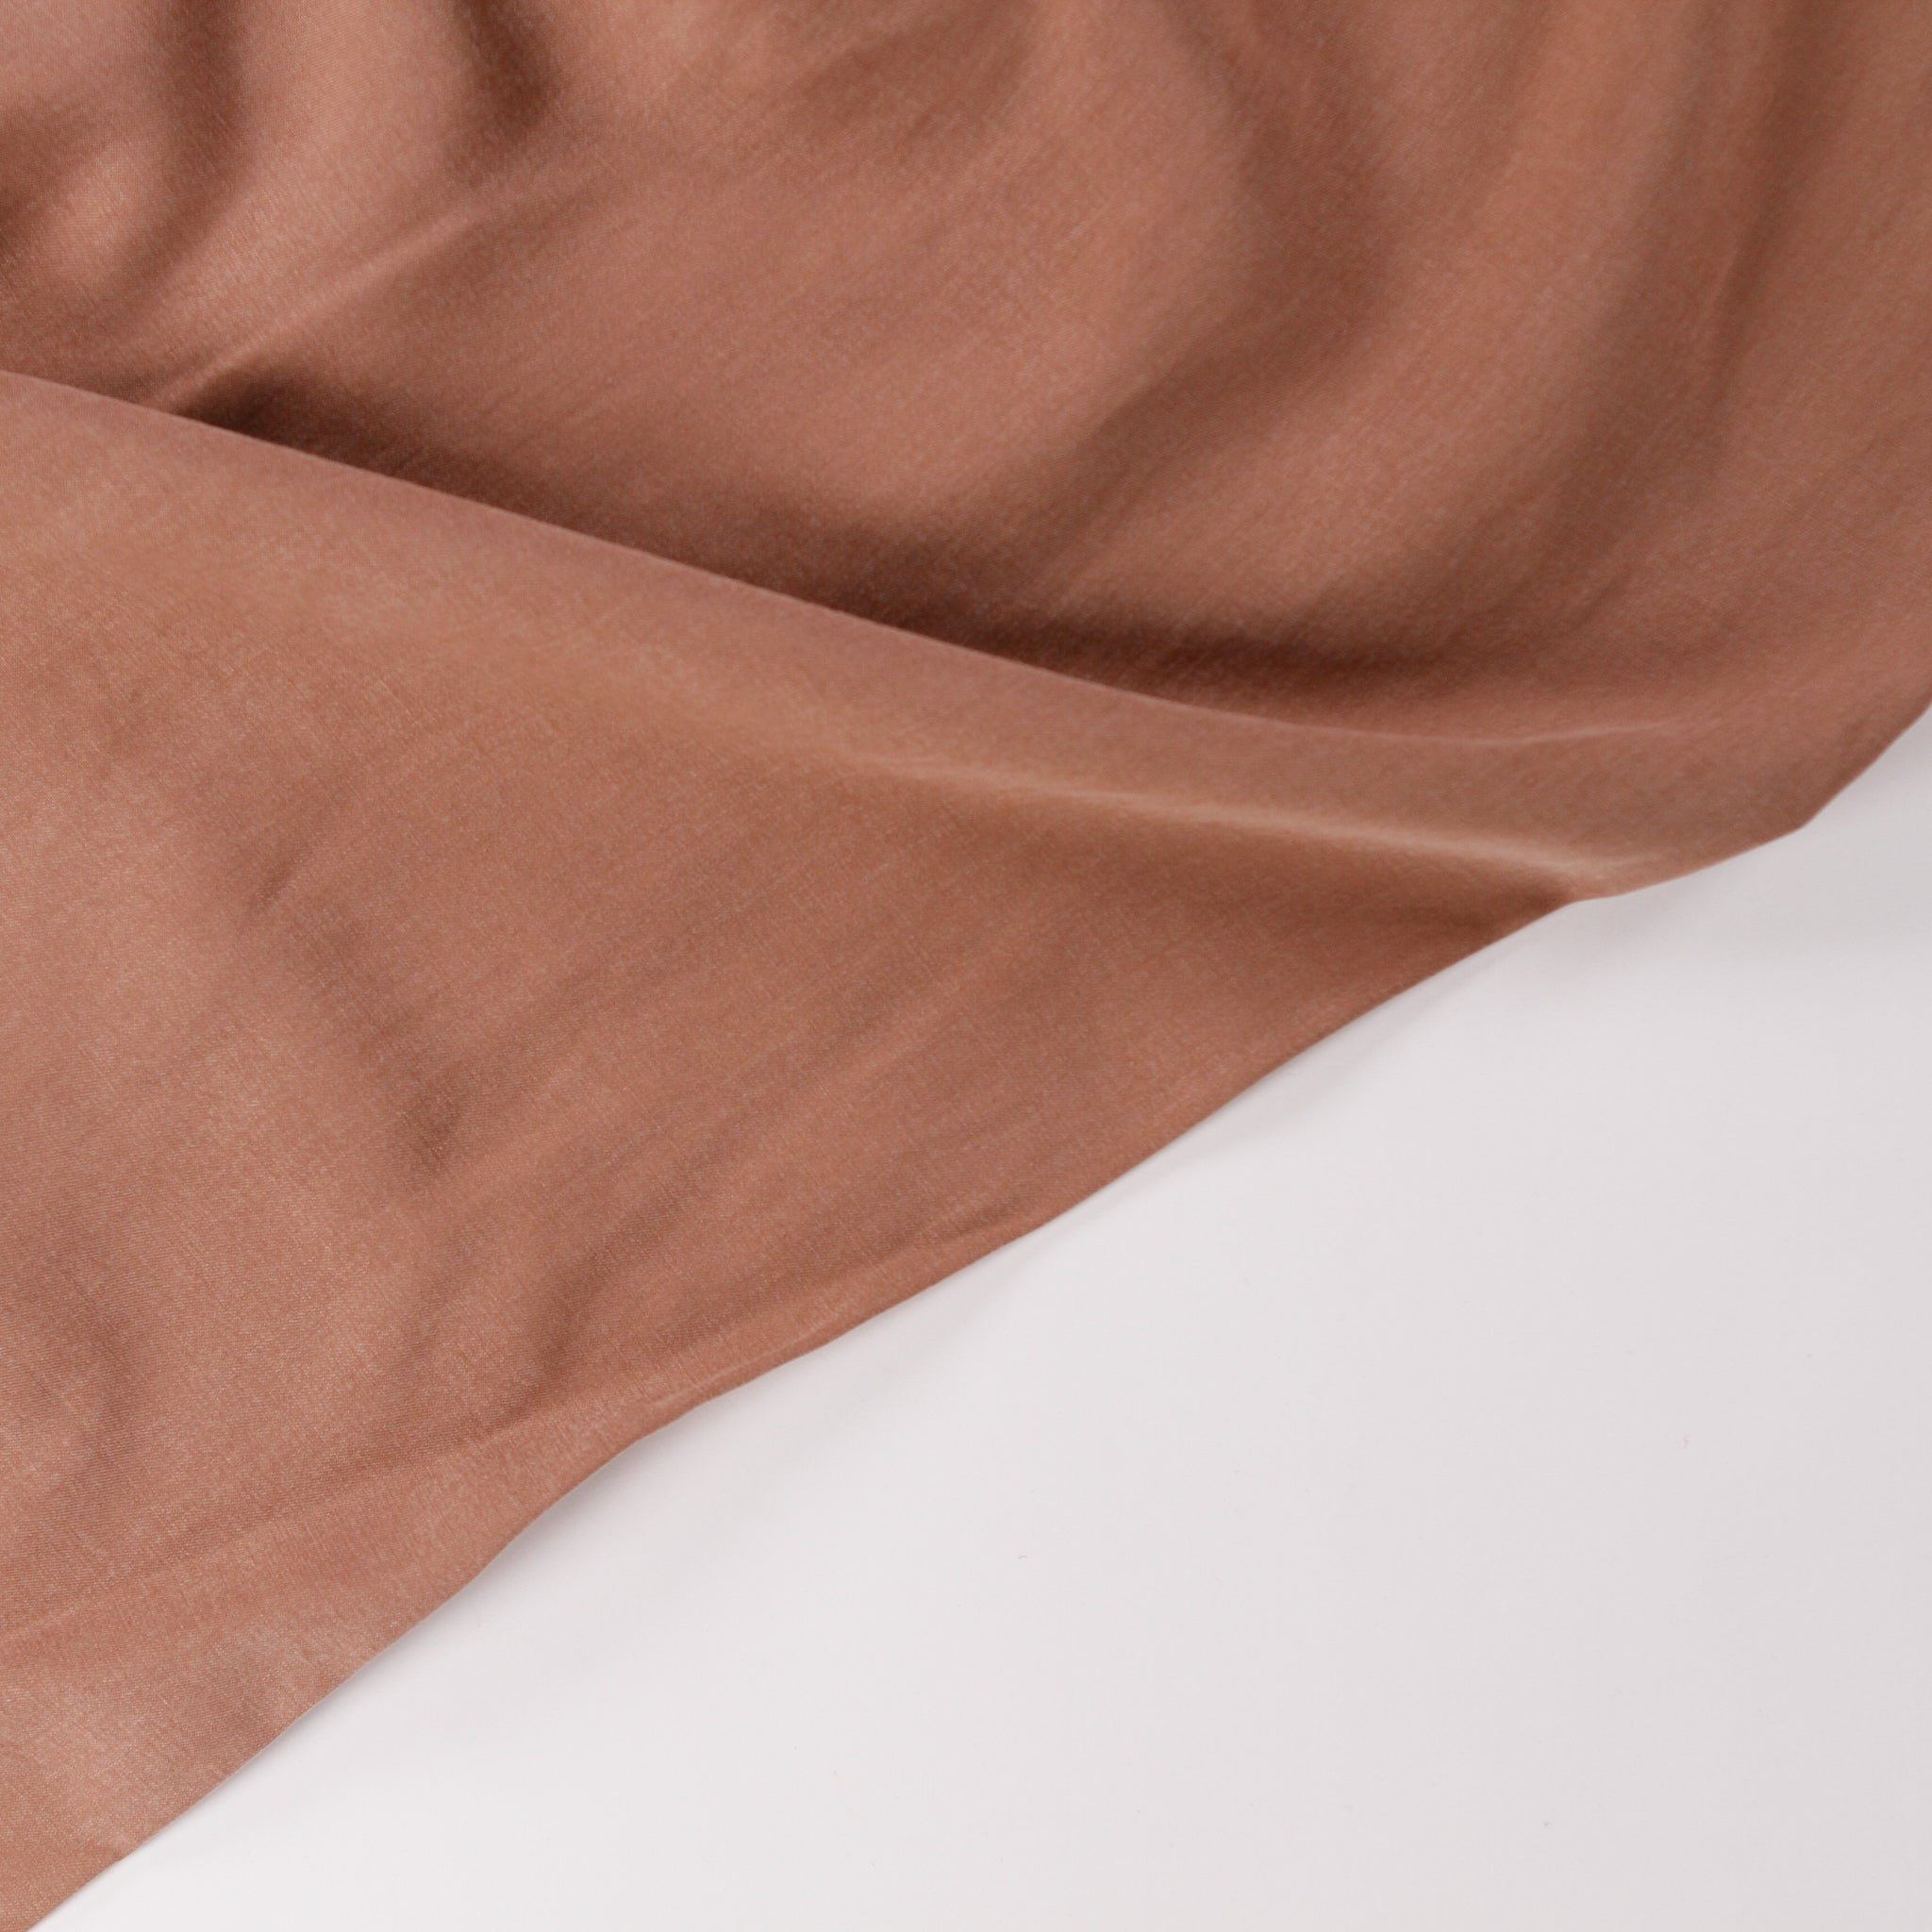 Tencel Twill Fabric from Merchant & Mills - Ritual Dyes